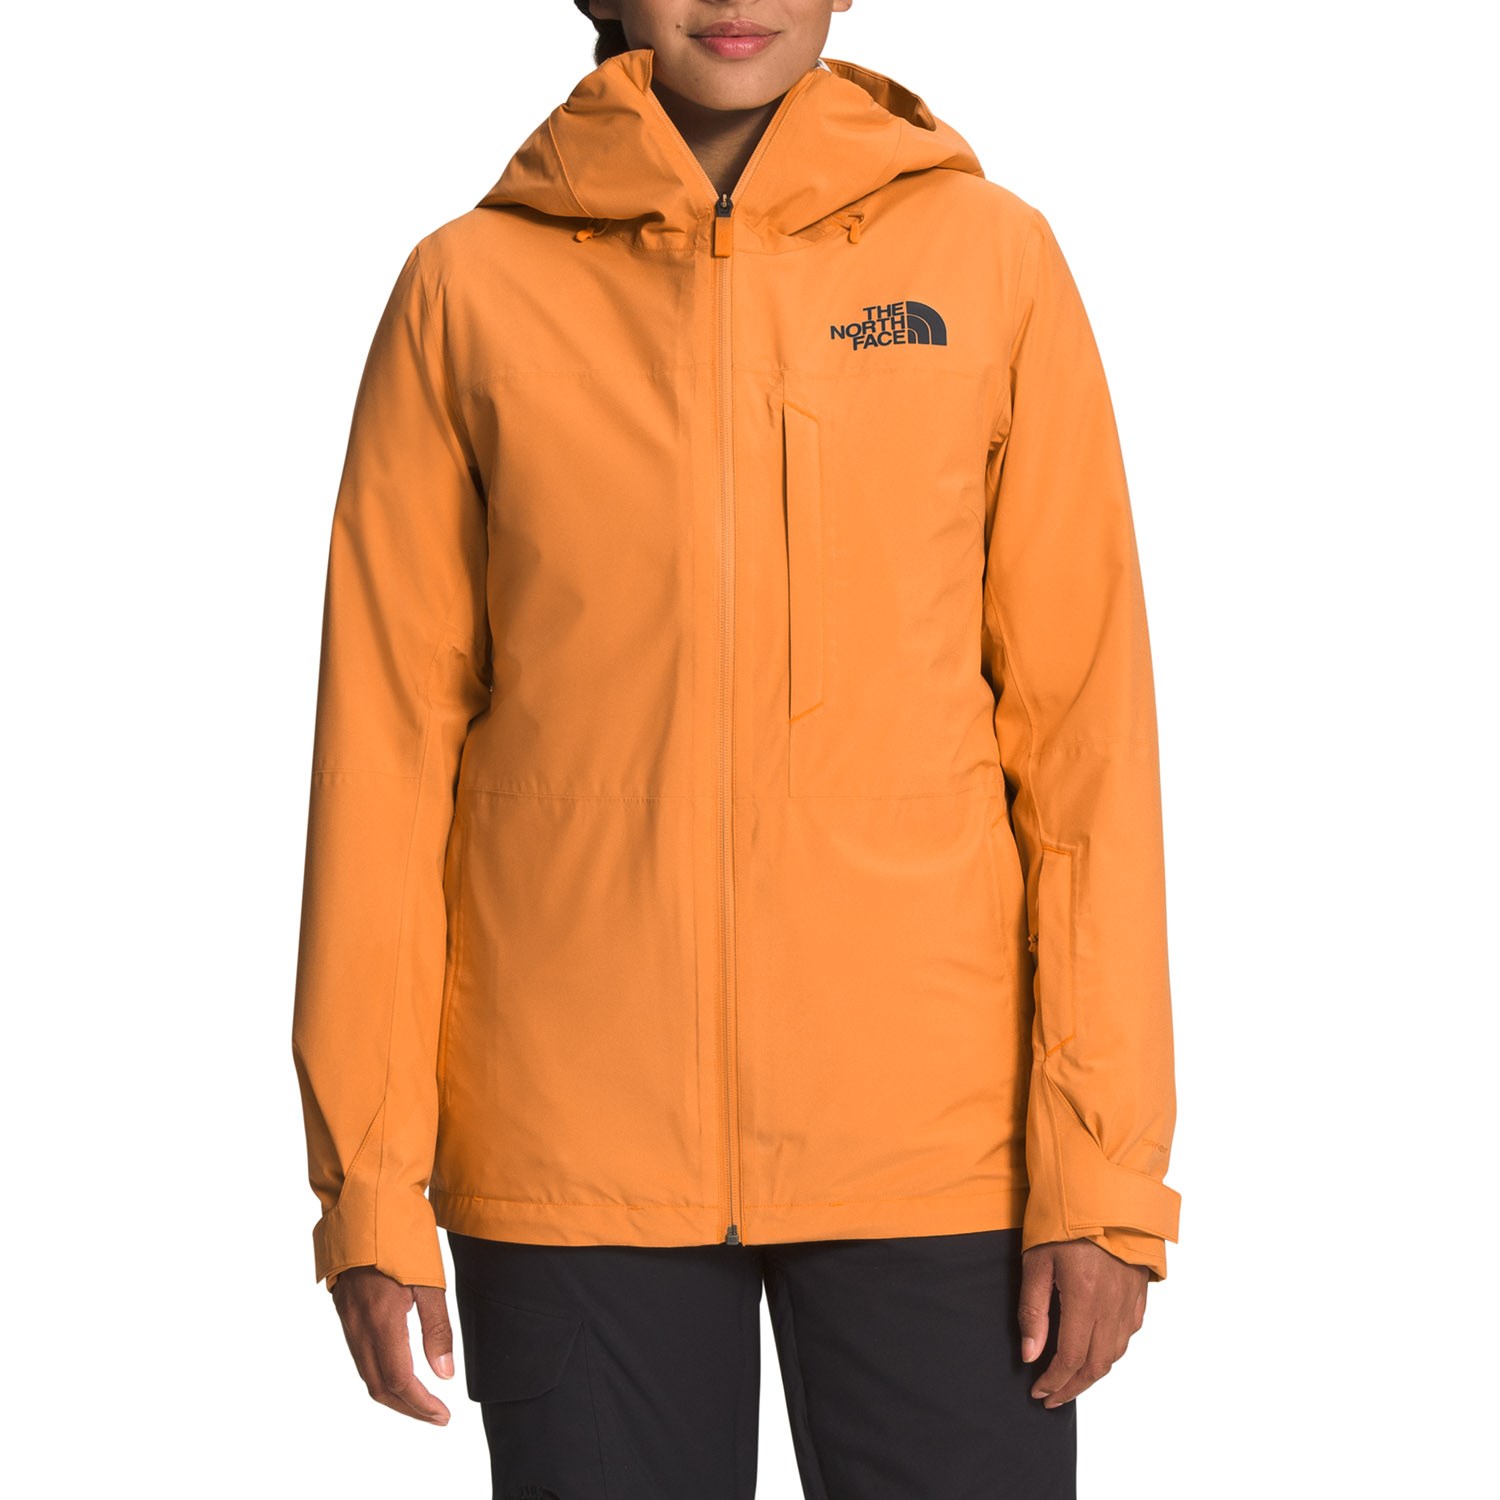 Куртка The North Face ThermoBall Eco Snow Triclimate, цвет Topaz куртка thermoball eco snow triclimate мужская the north face цвет cave blue